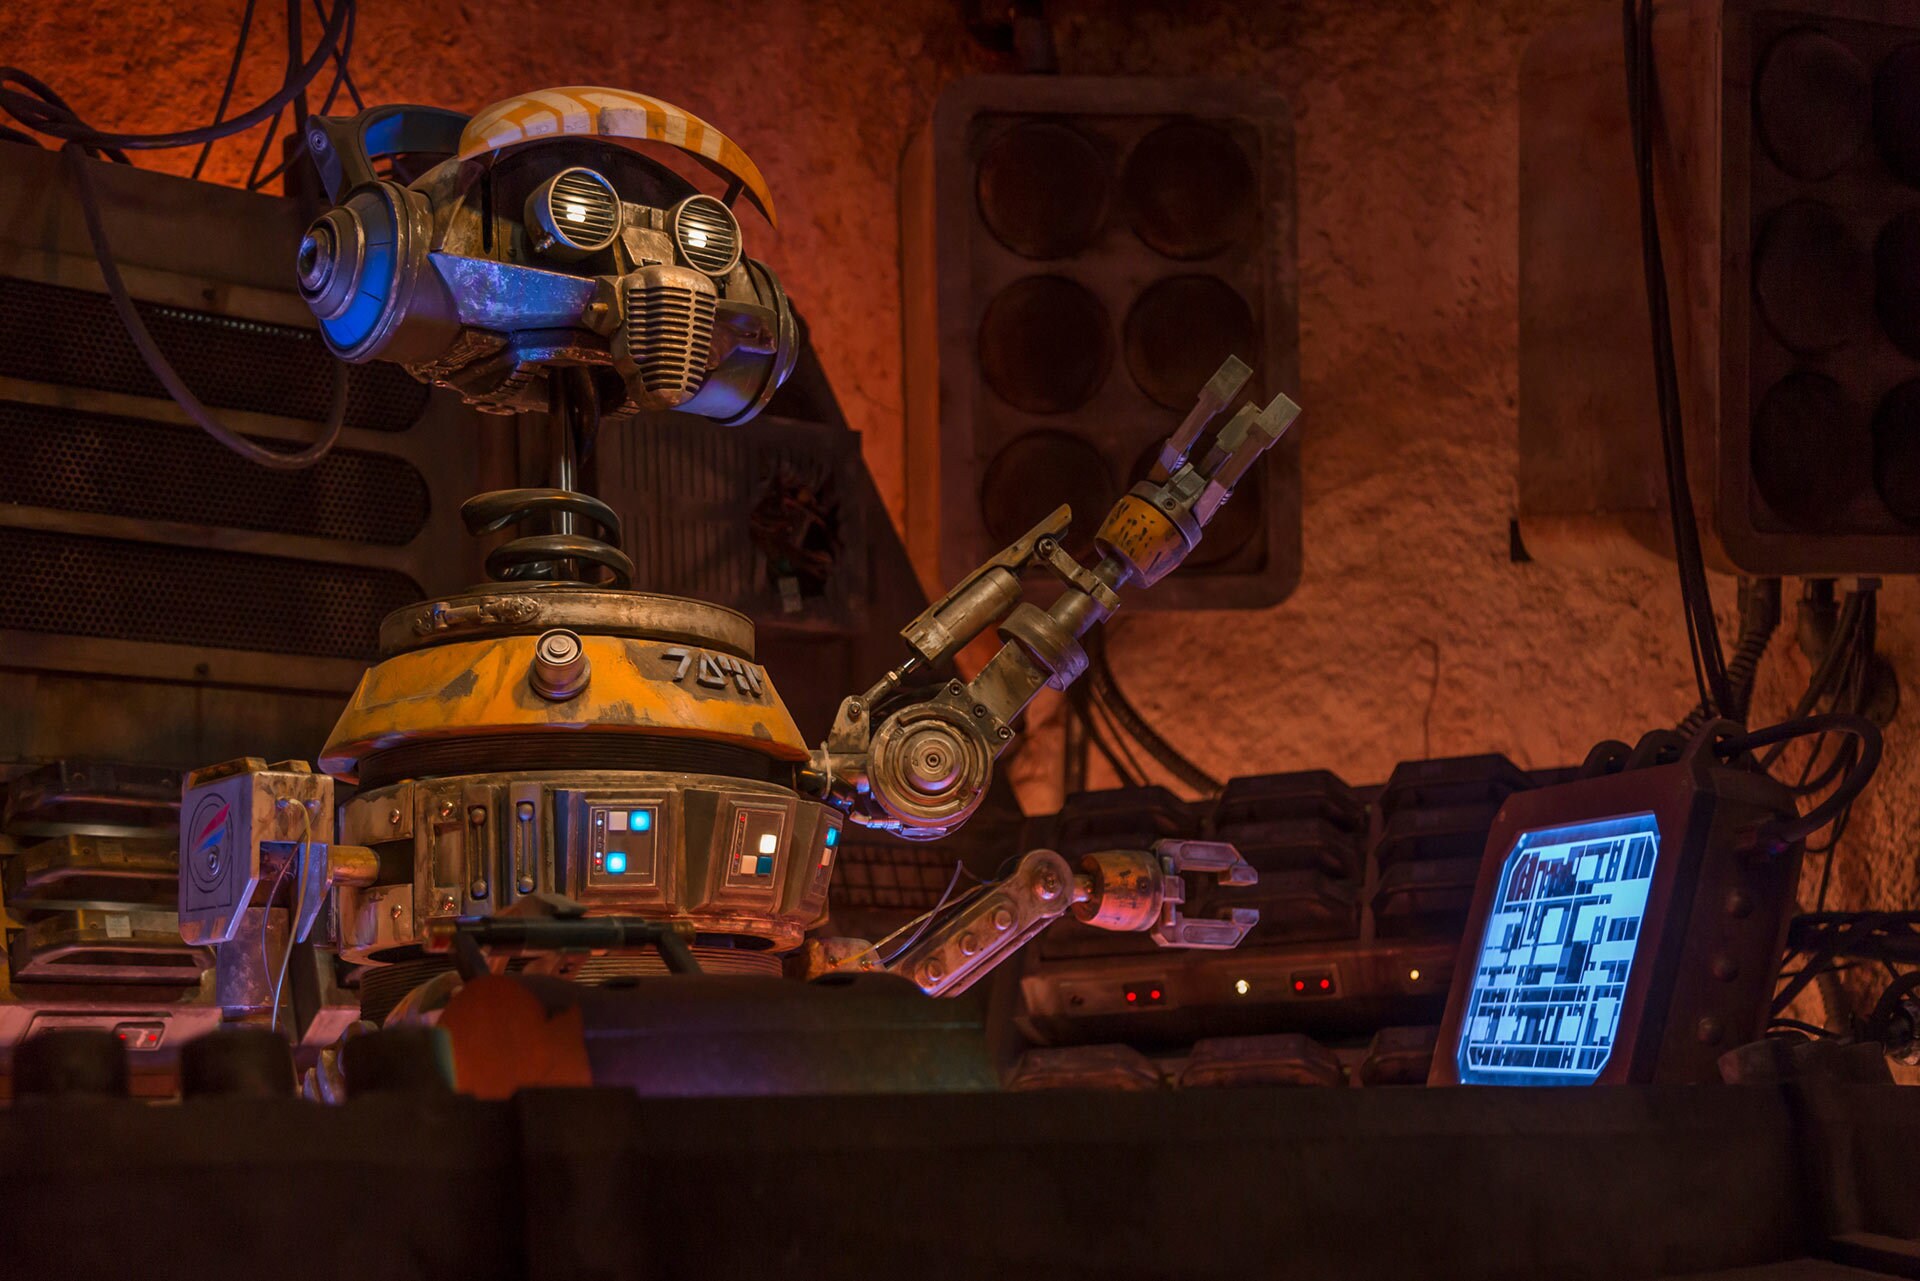 At Black Spire Outpost, the droid in charge of music at the local watering hole, Oga’s Cantina, i...